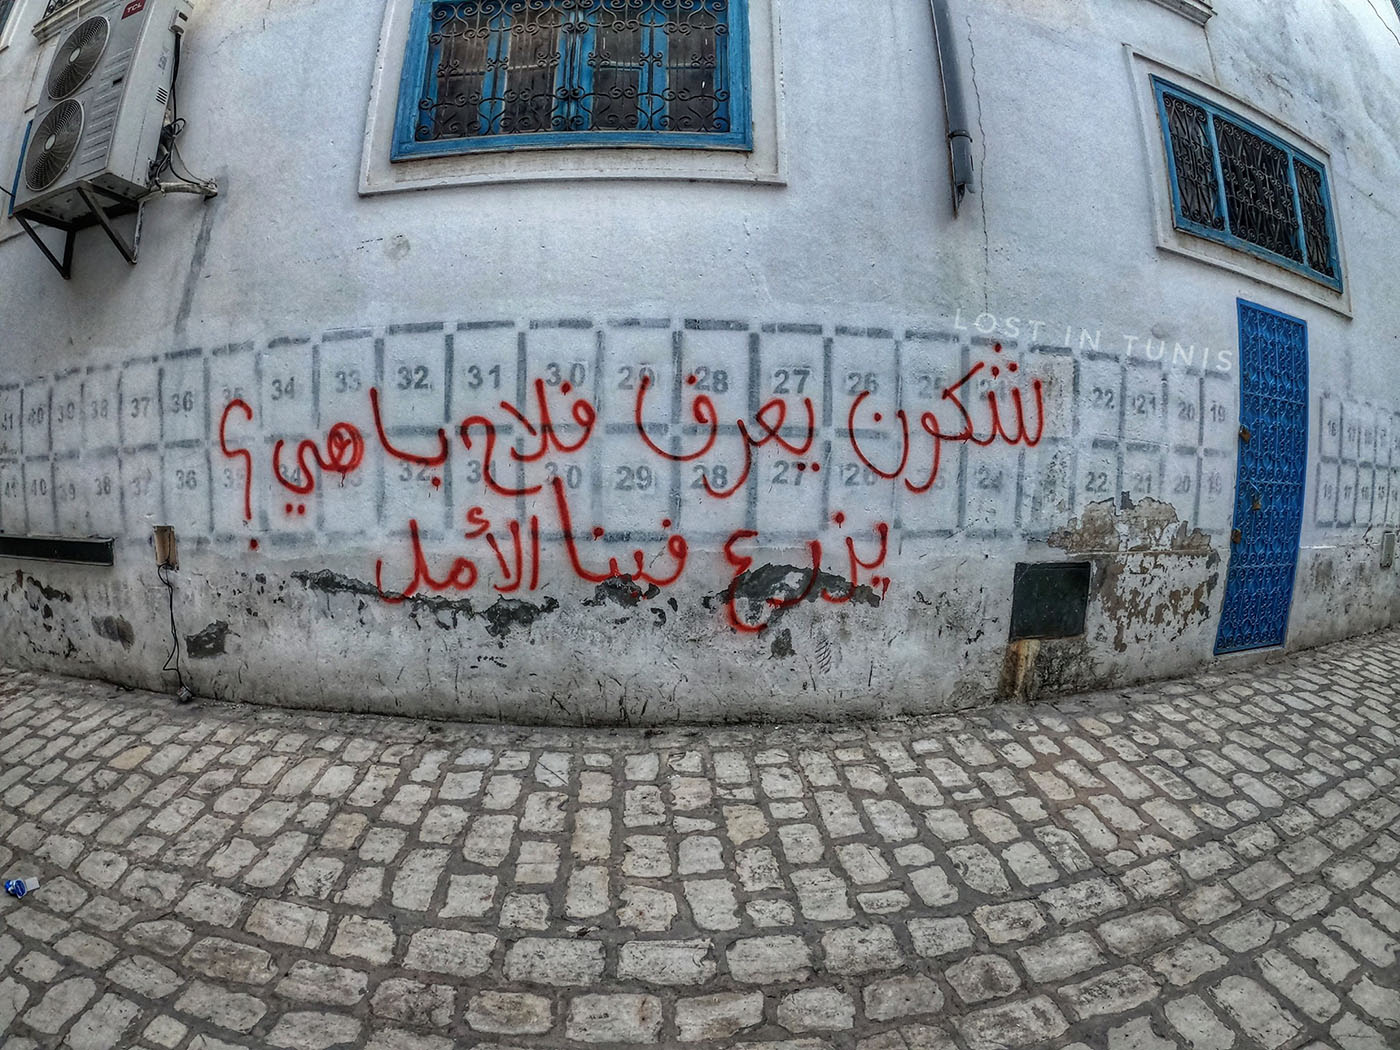 “Who knows a good farmer? To plant hope in us” (photo Lost in Tunis).